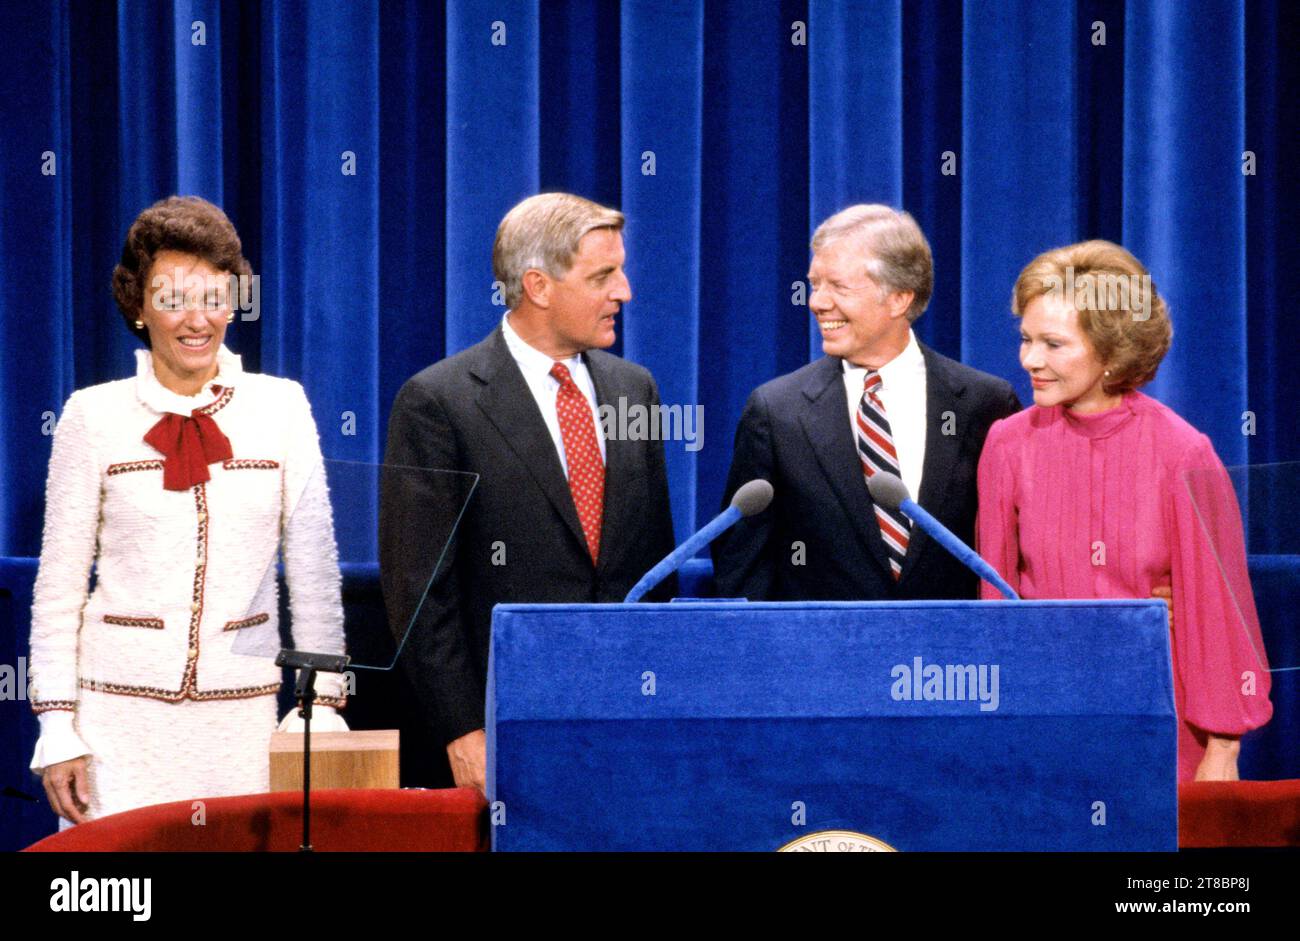 **FILE PHOTO** Rosalynn Carter Has Passed Away. United States President Jimmy Carter, center right, and US Vice President Walter Mondale, center left, and their wives, first lady Rosalynn Carter, right, and Joan Mondale, left, on the podium after delivering their acceptance speeches at the 1980 Democratic National Convention in Madison Square Garden in New York, New York on August 13, 1980. Credit: Arnie Sachs/CNP /MediaPunch Stock Photo